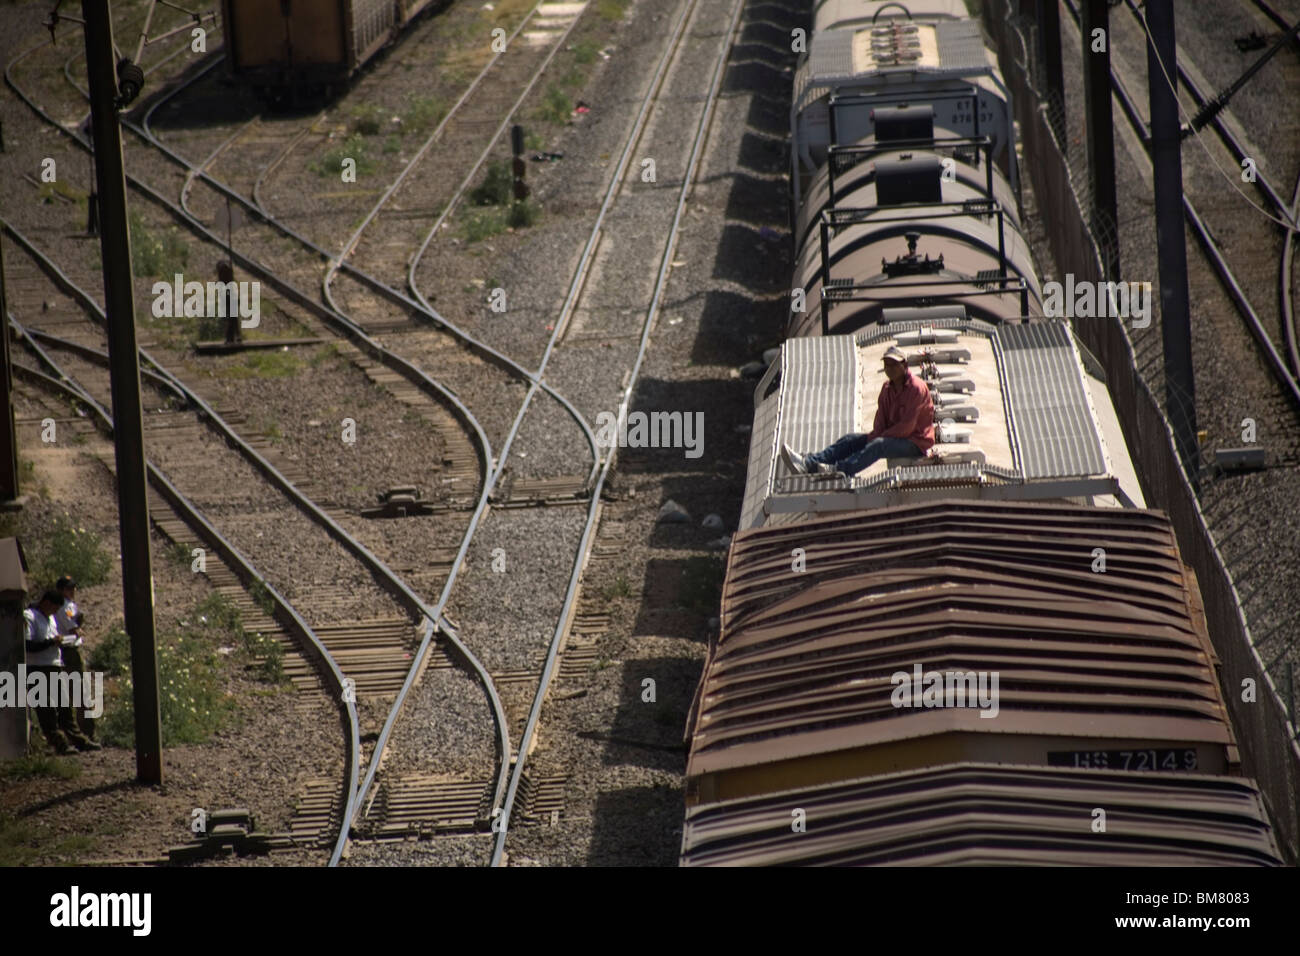 An undocumented Central American migrant traveling across Mexico to work in the US sits on the roof of a train in Mexico City. Stock Photo